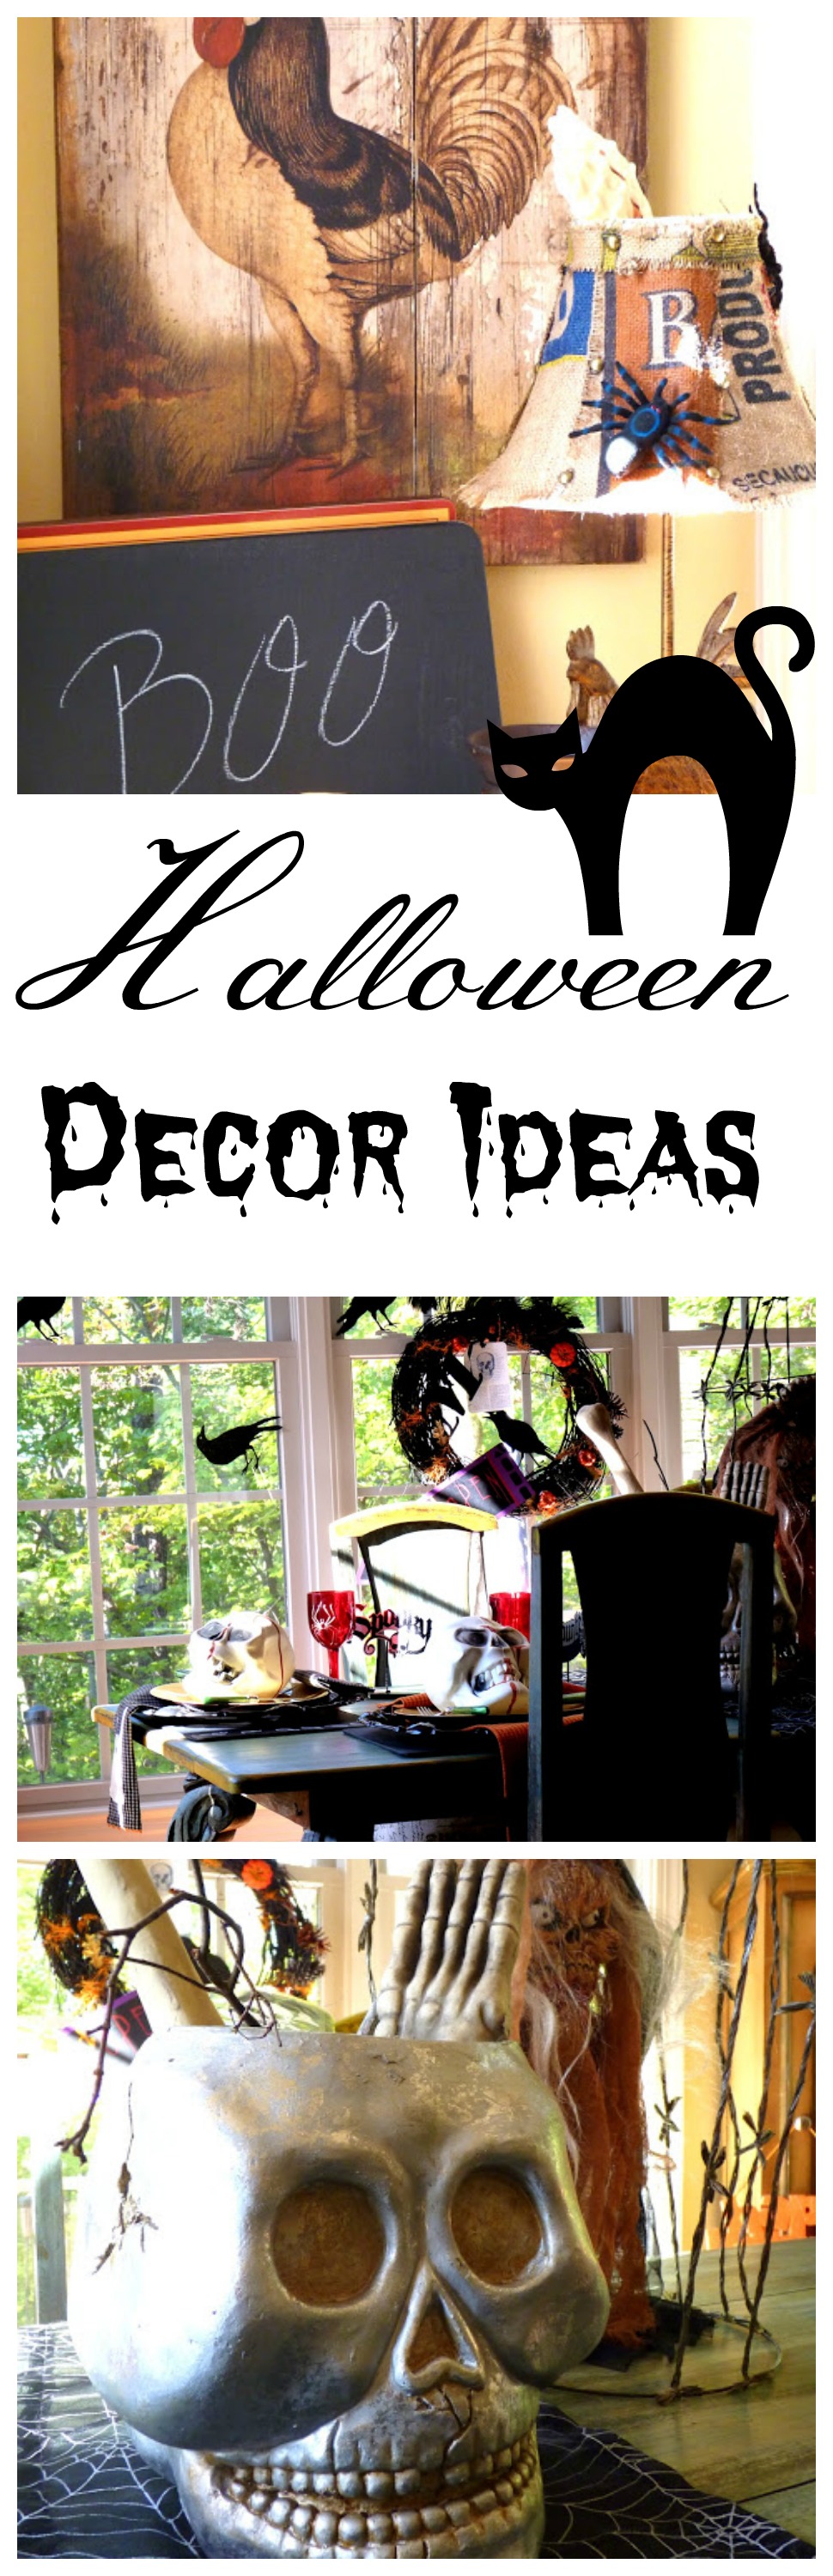 Halloween decor ideas and more